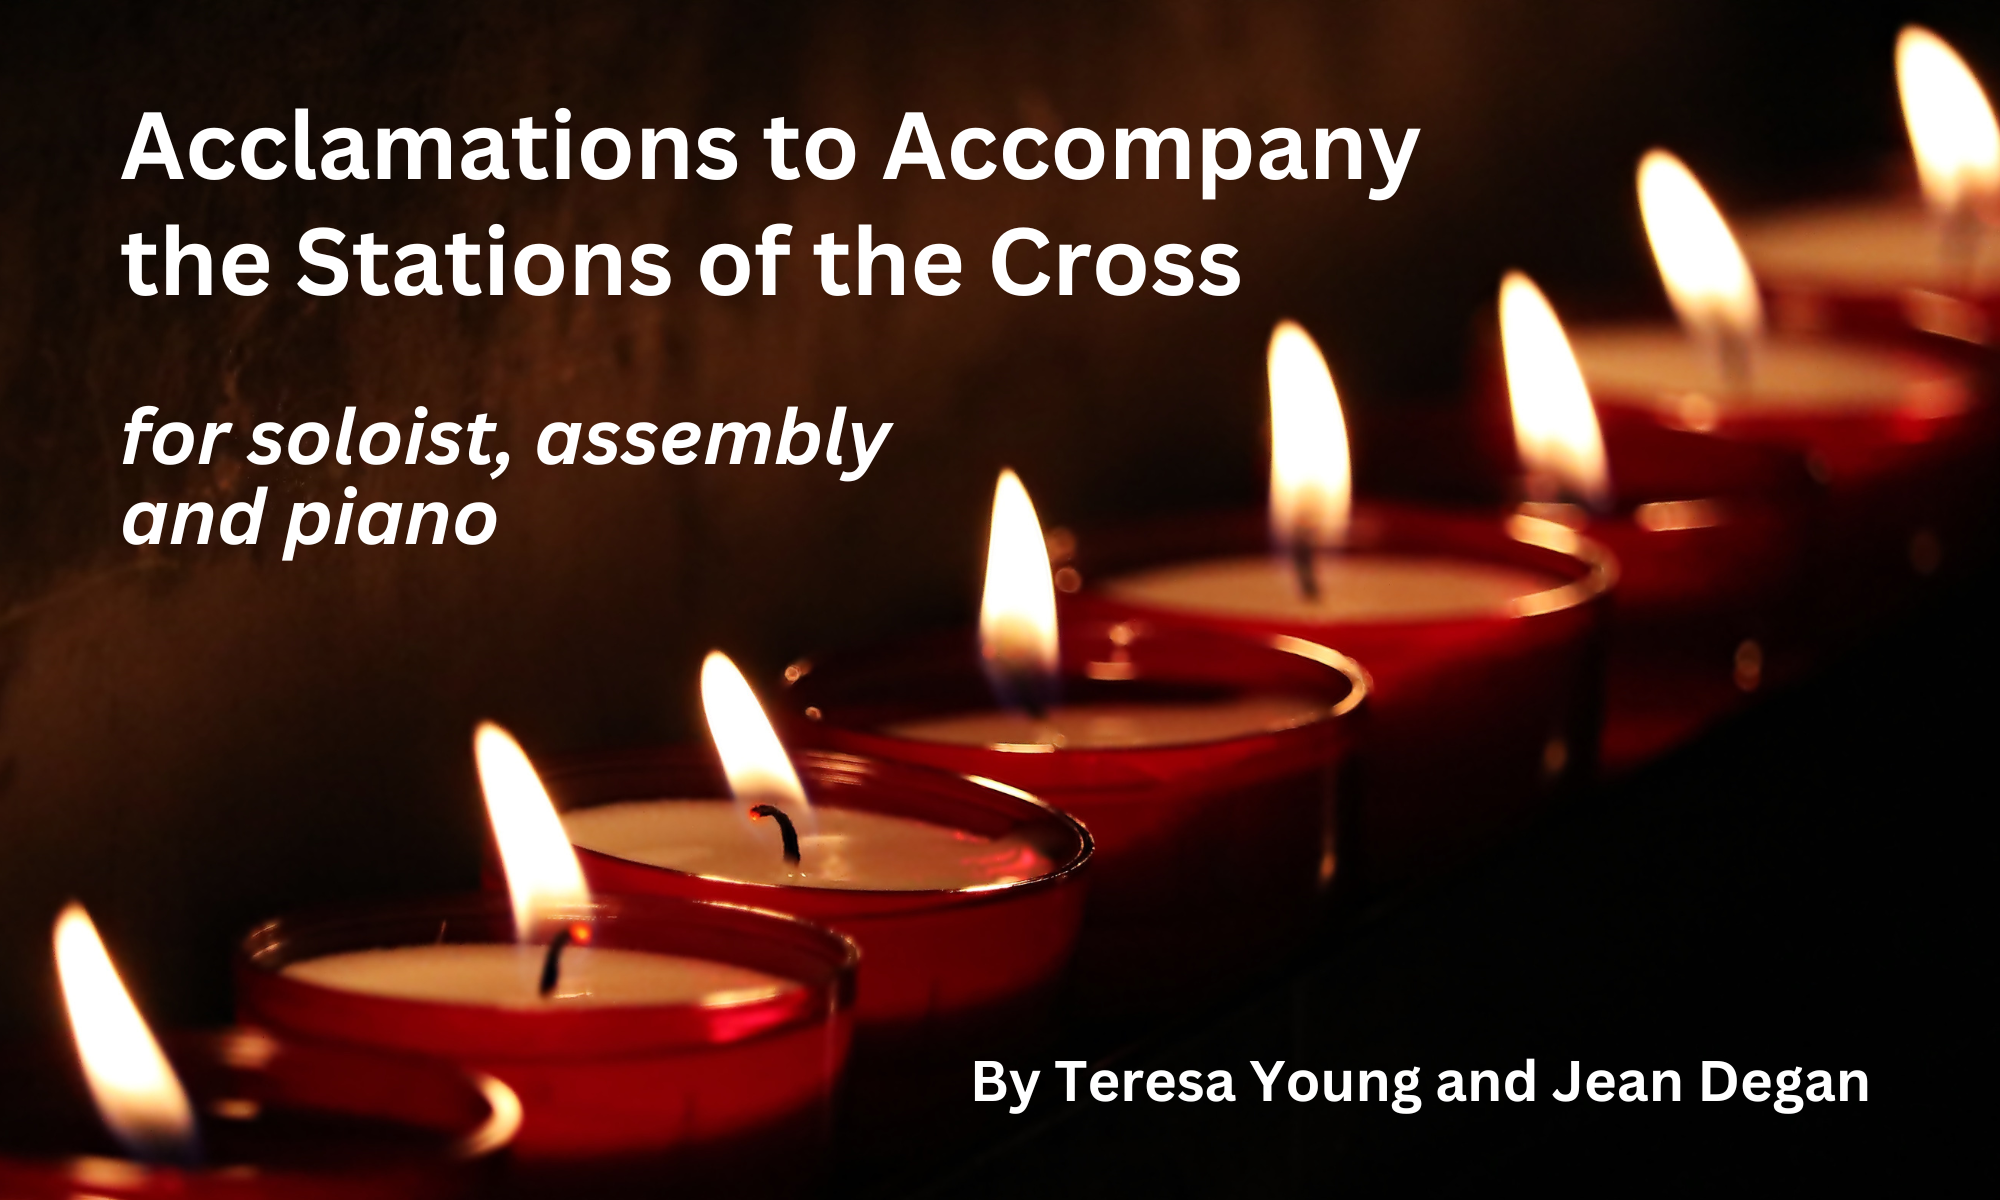 Acclamations to Accompany the Stations of the Cross